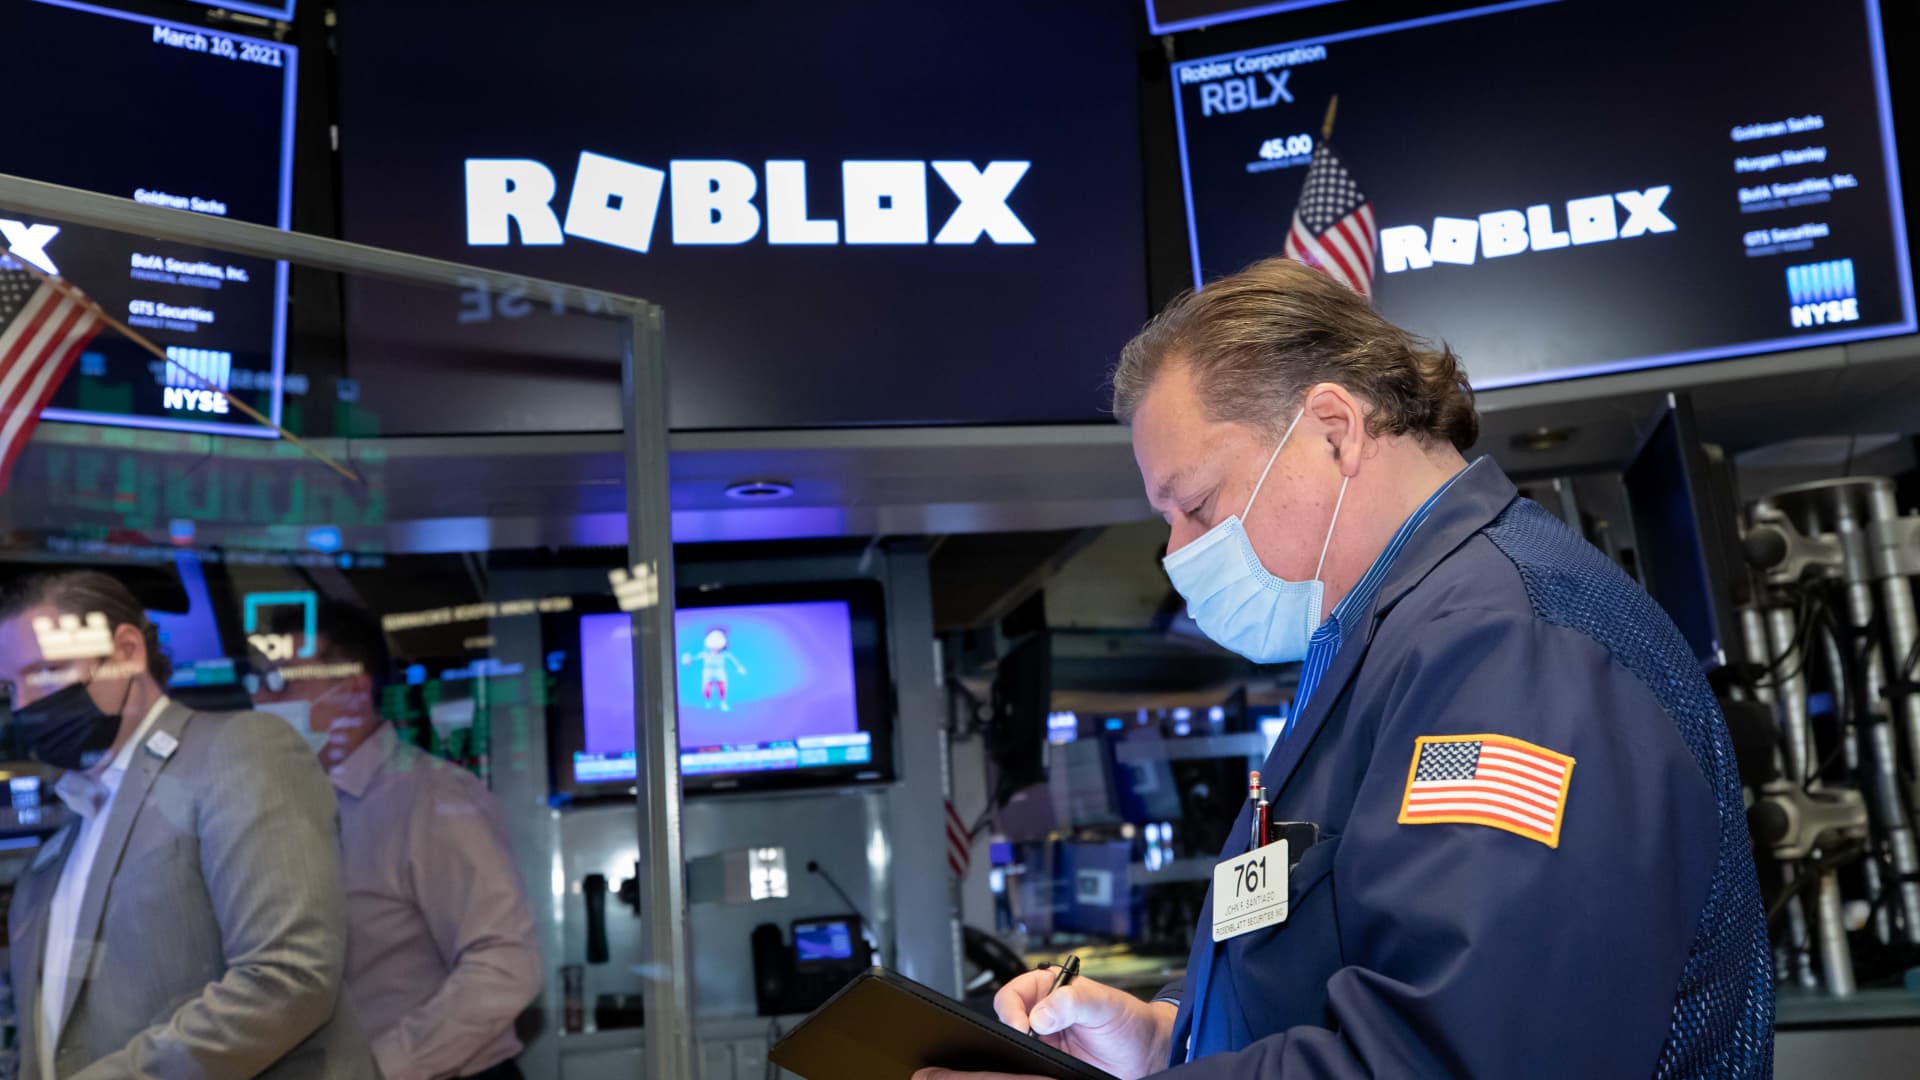 Roblox misses on top and bottom, shares dip 14%